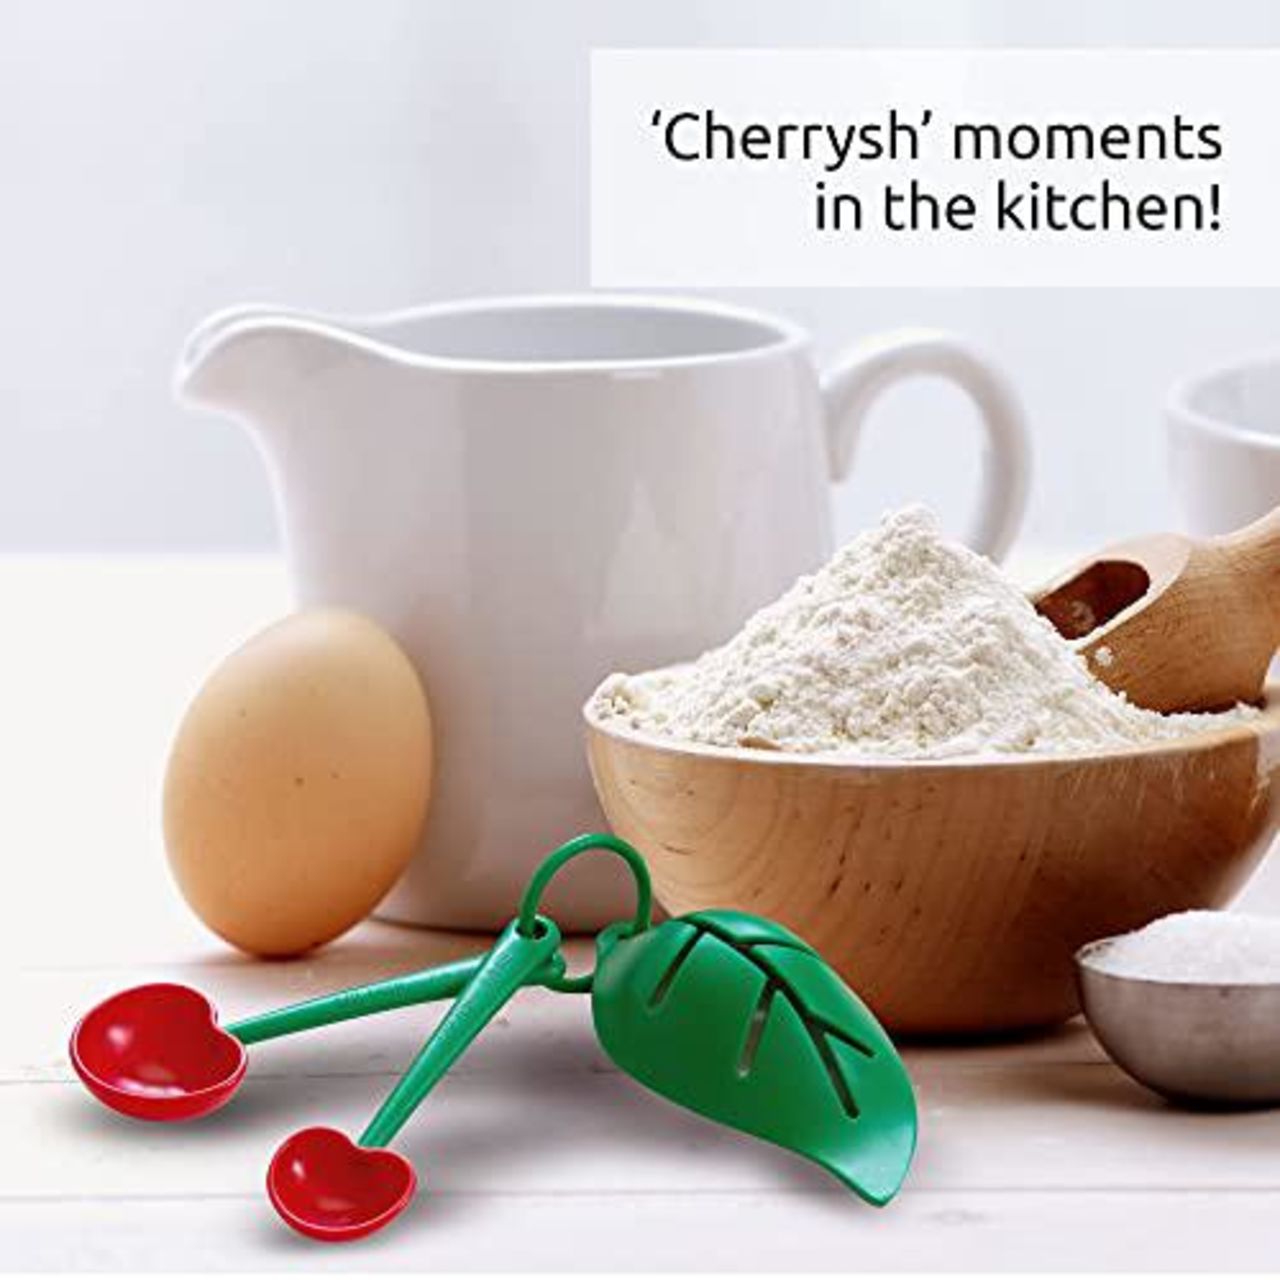  Quirky Kitchen Gadgets